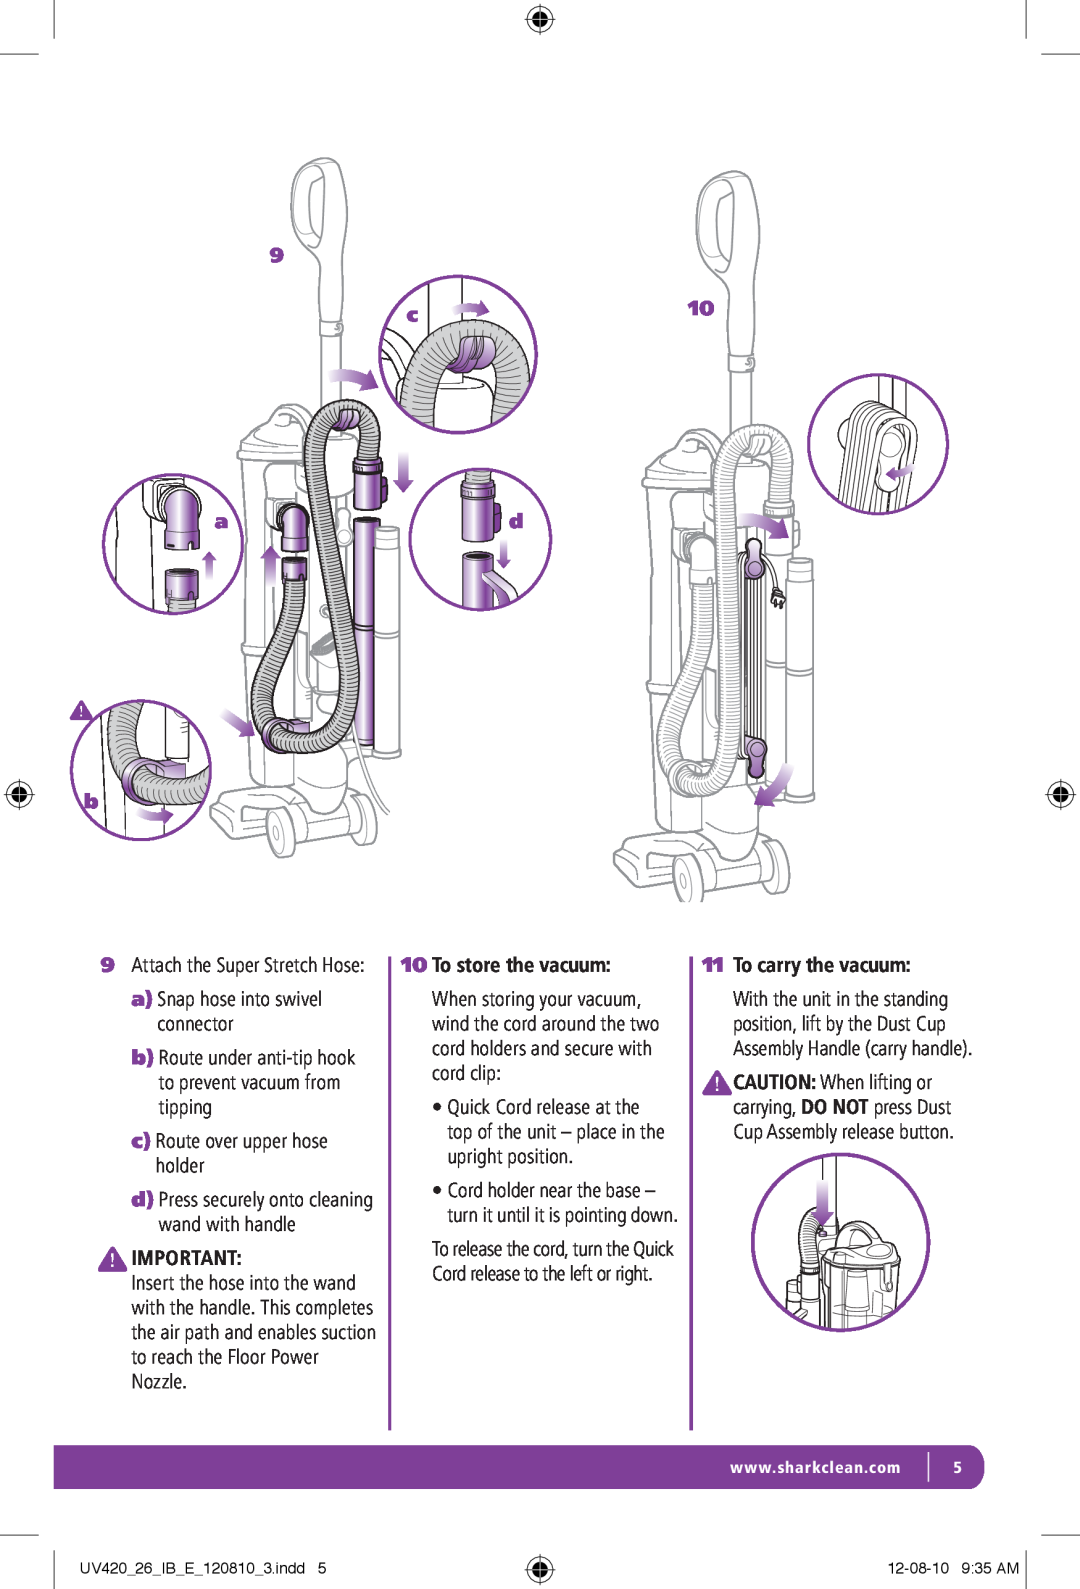 Shark UV420 manual a Snap hose into swivel connector, b Route under anti-tip hook to prevent vacuum from tipping 